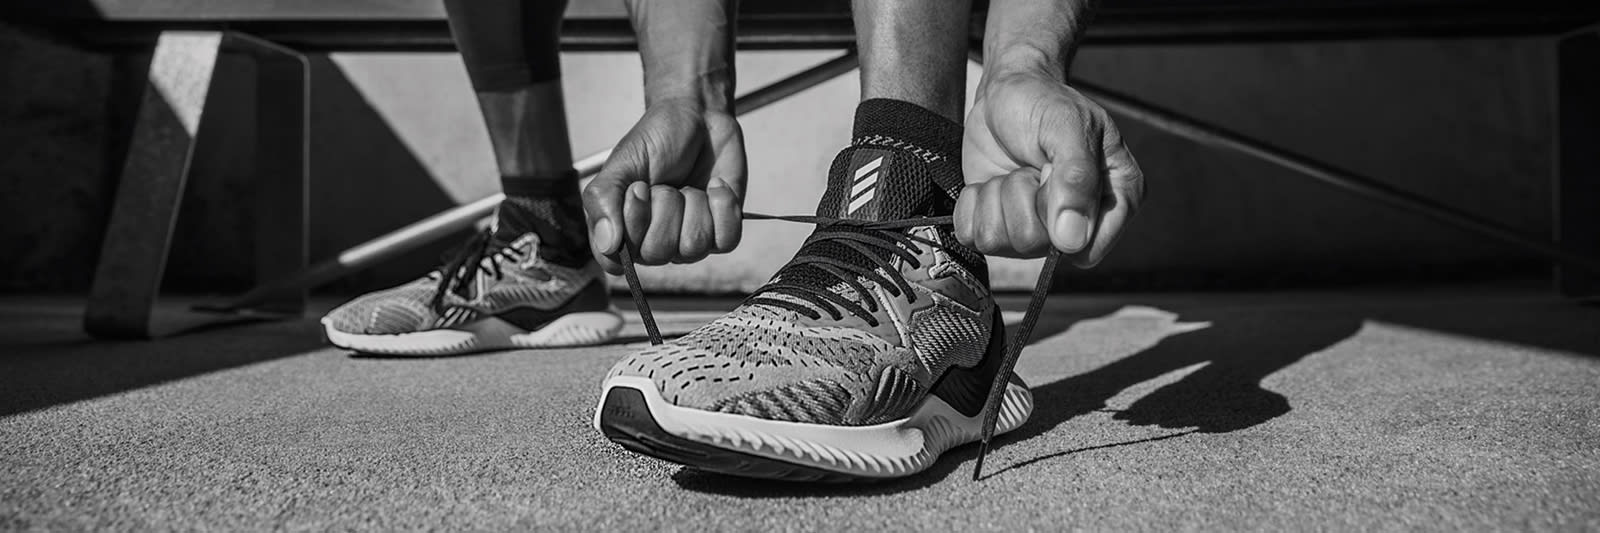 Running Shoe Lacing Techniques for Better Fit | ASICS NZ